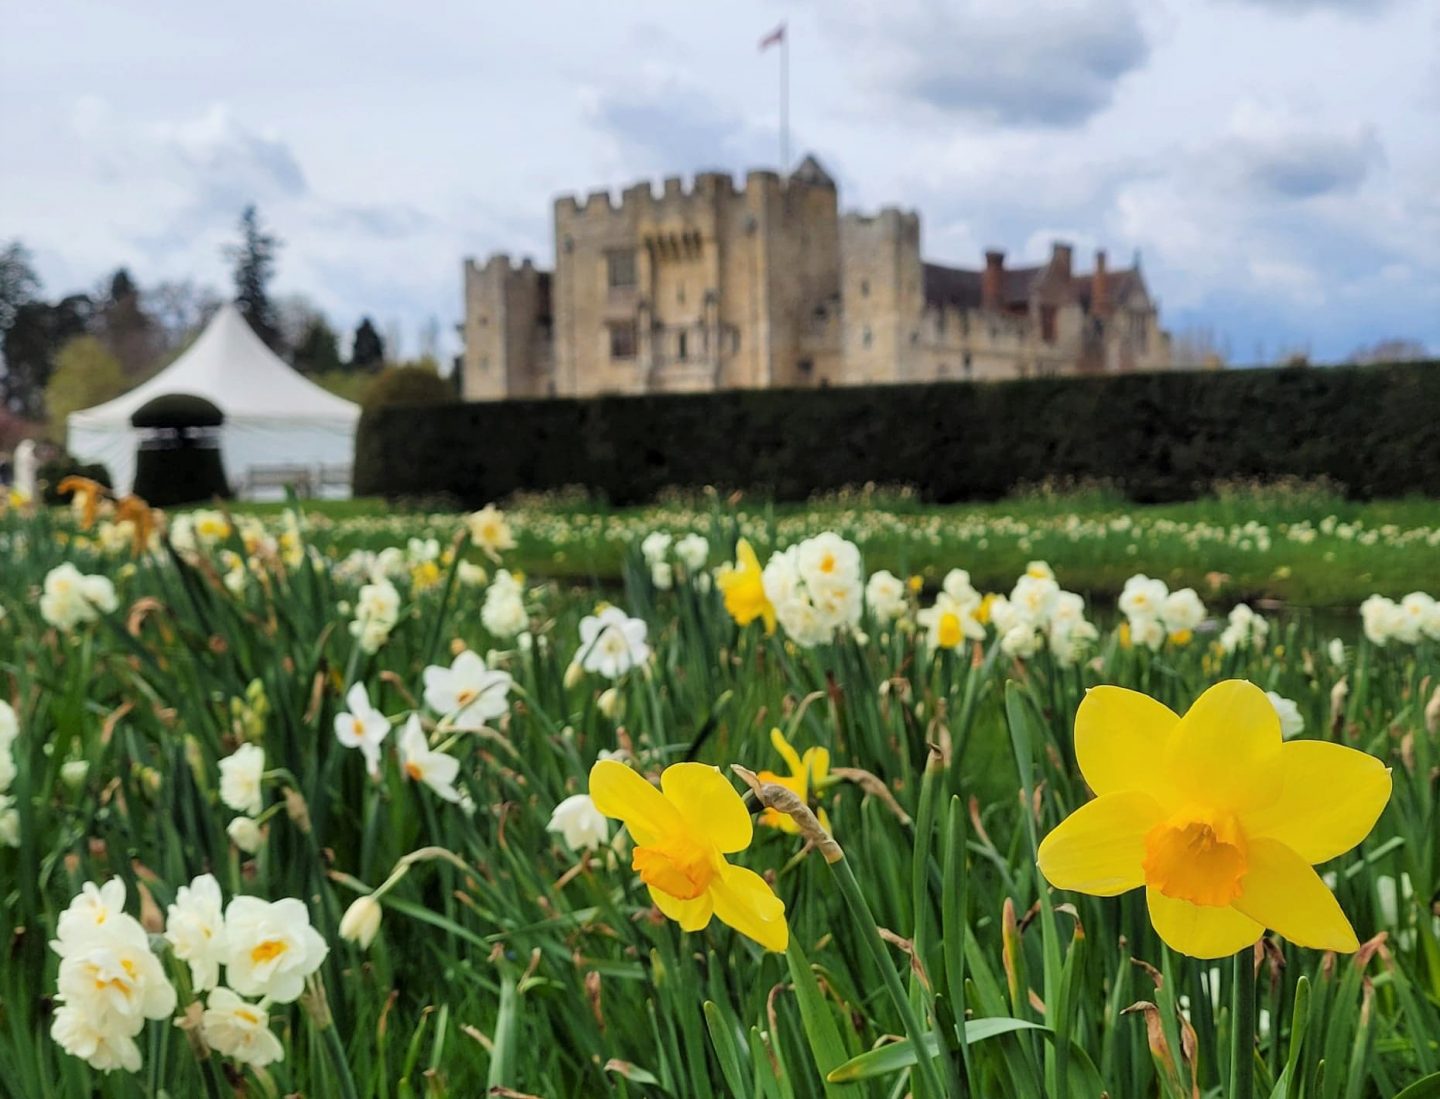 Daffodils in the spring at Hever Castle